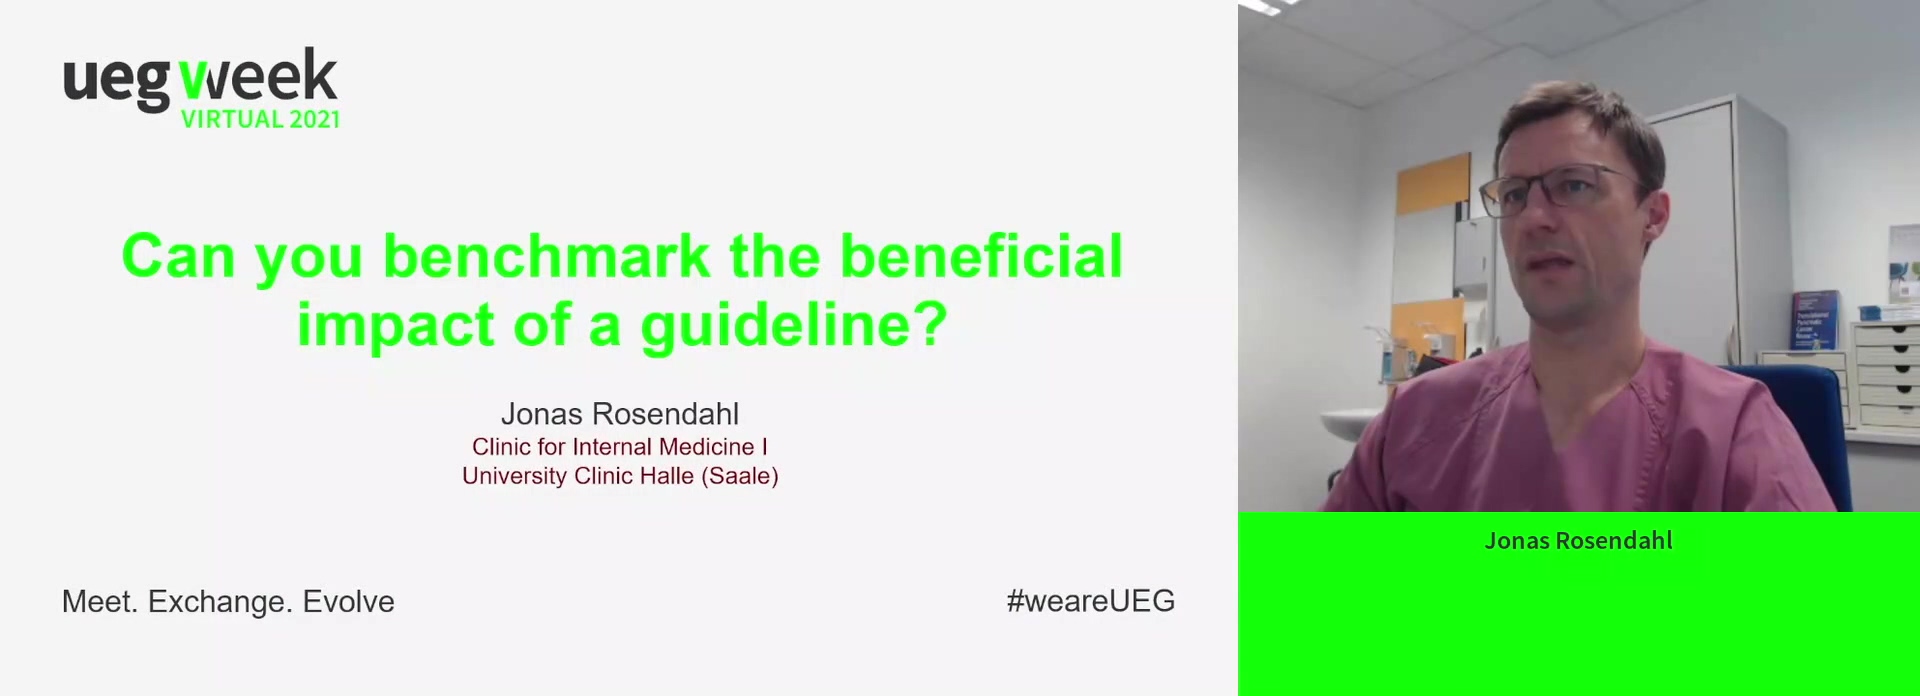 Can you benchmark the beneficial impact of a guideline?